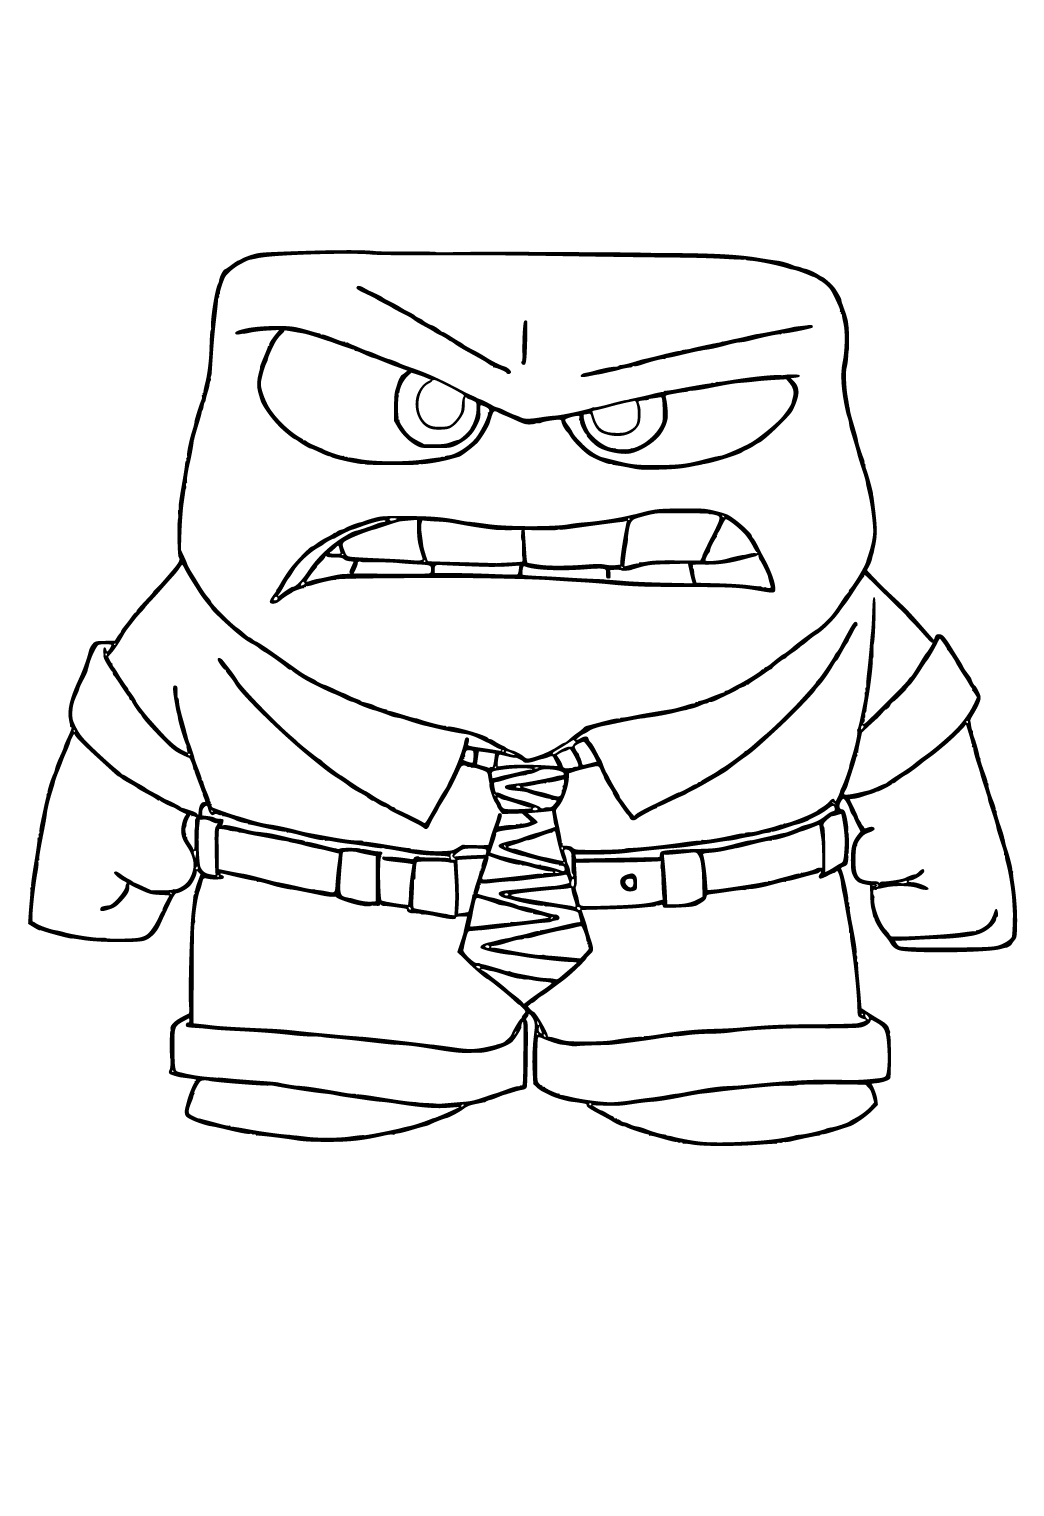 Free Printable Inside Out Anger Coloring Page for Adults and Kids ...